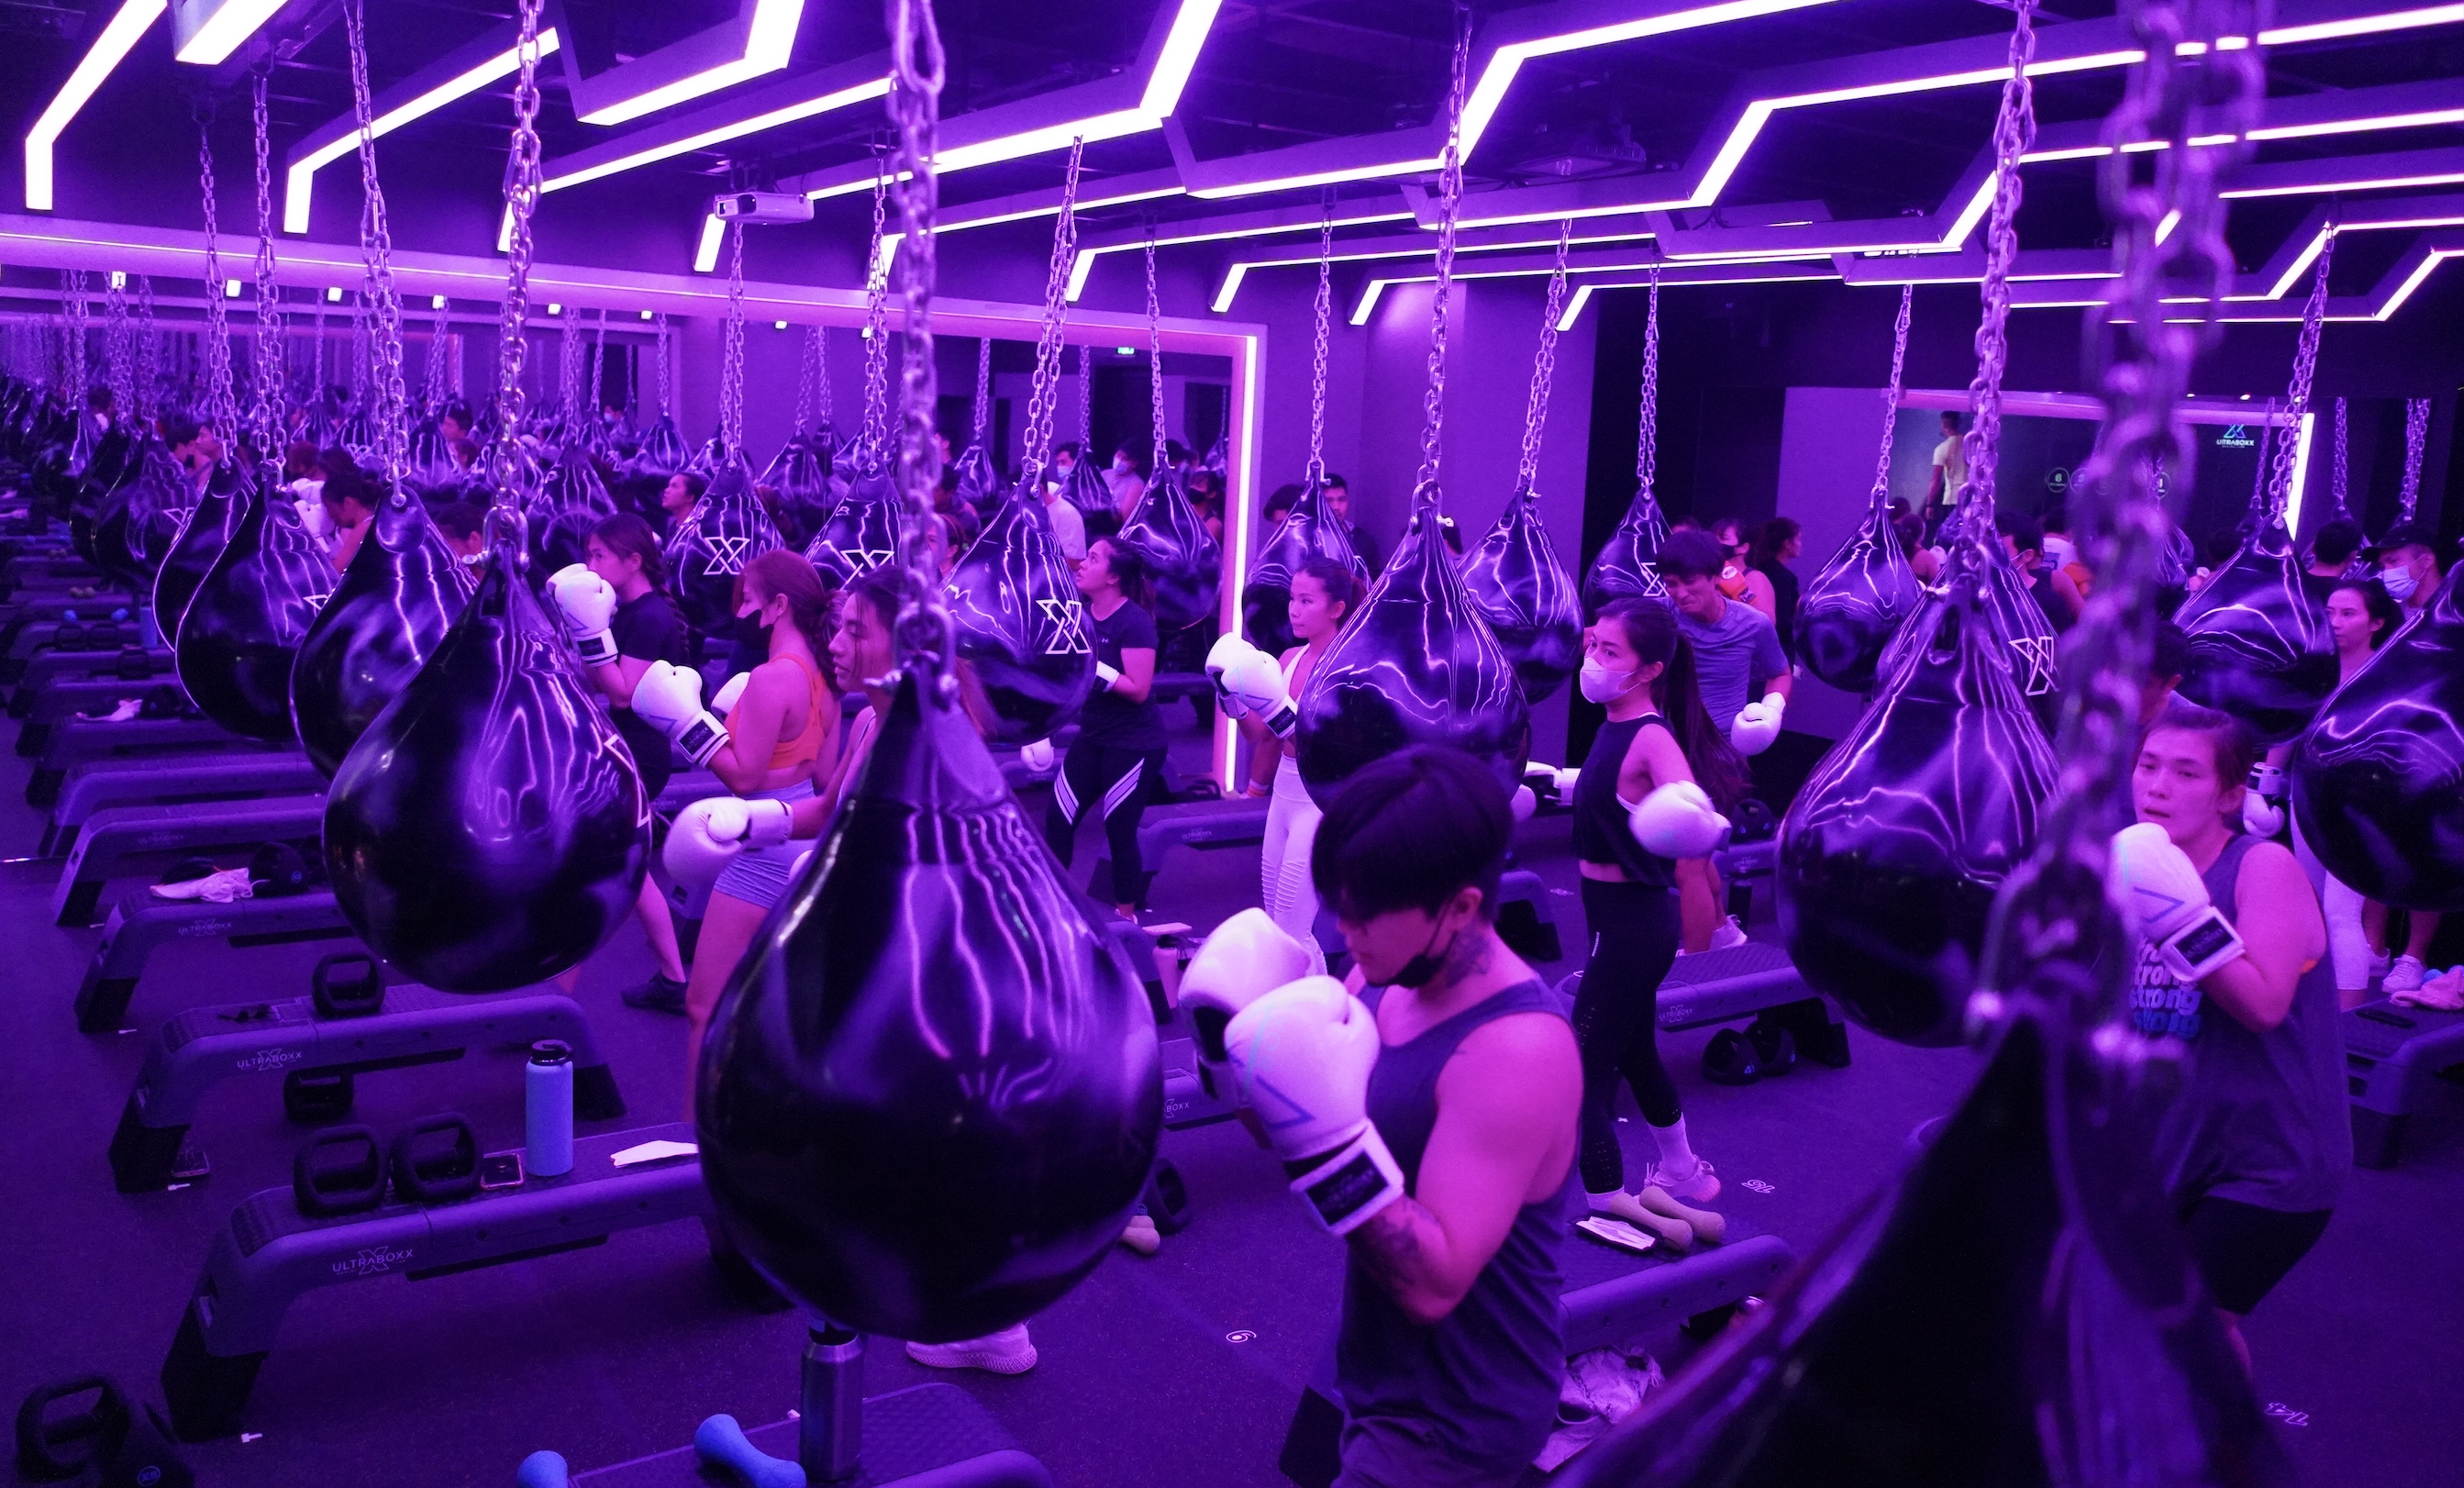 Ultraboxx punches its way into the urban fitness scene